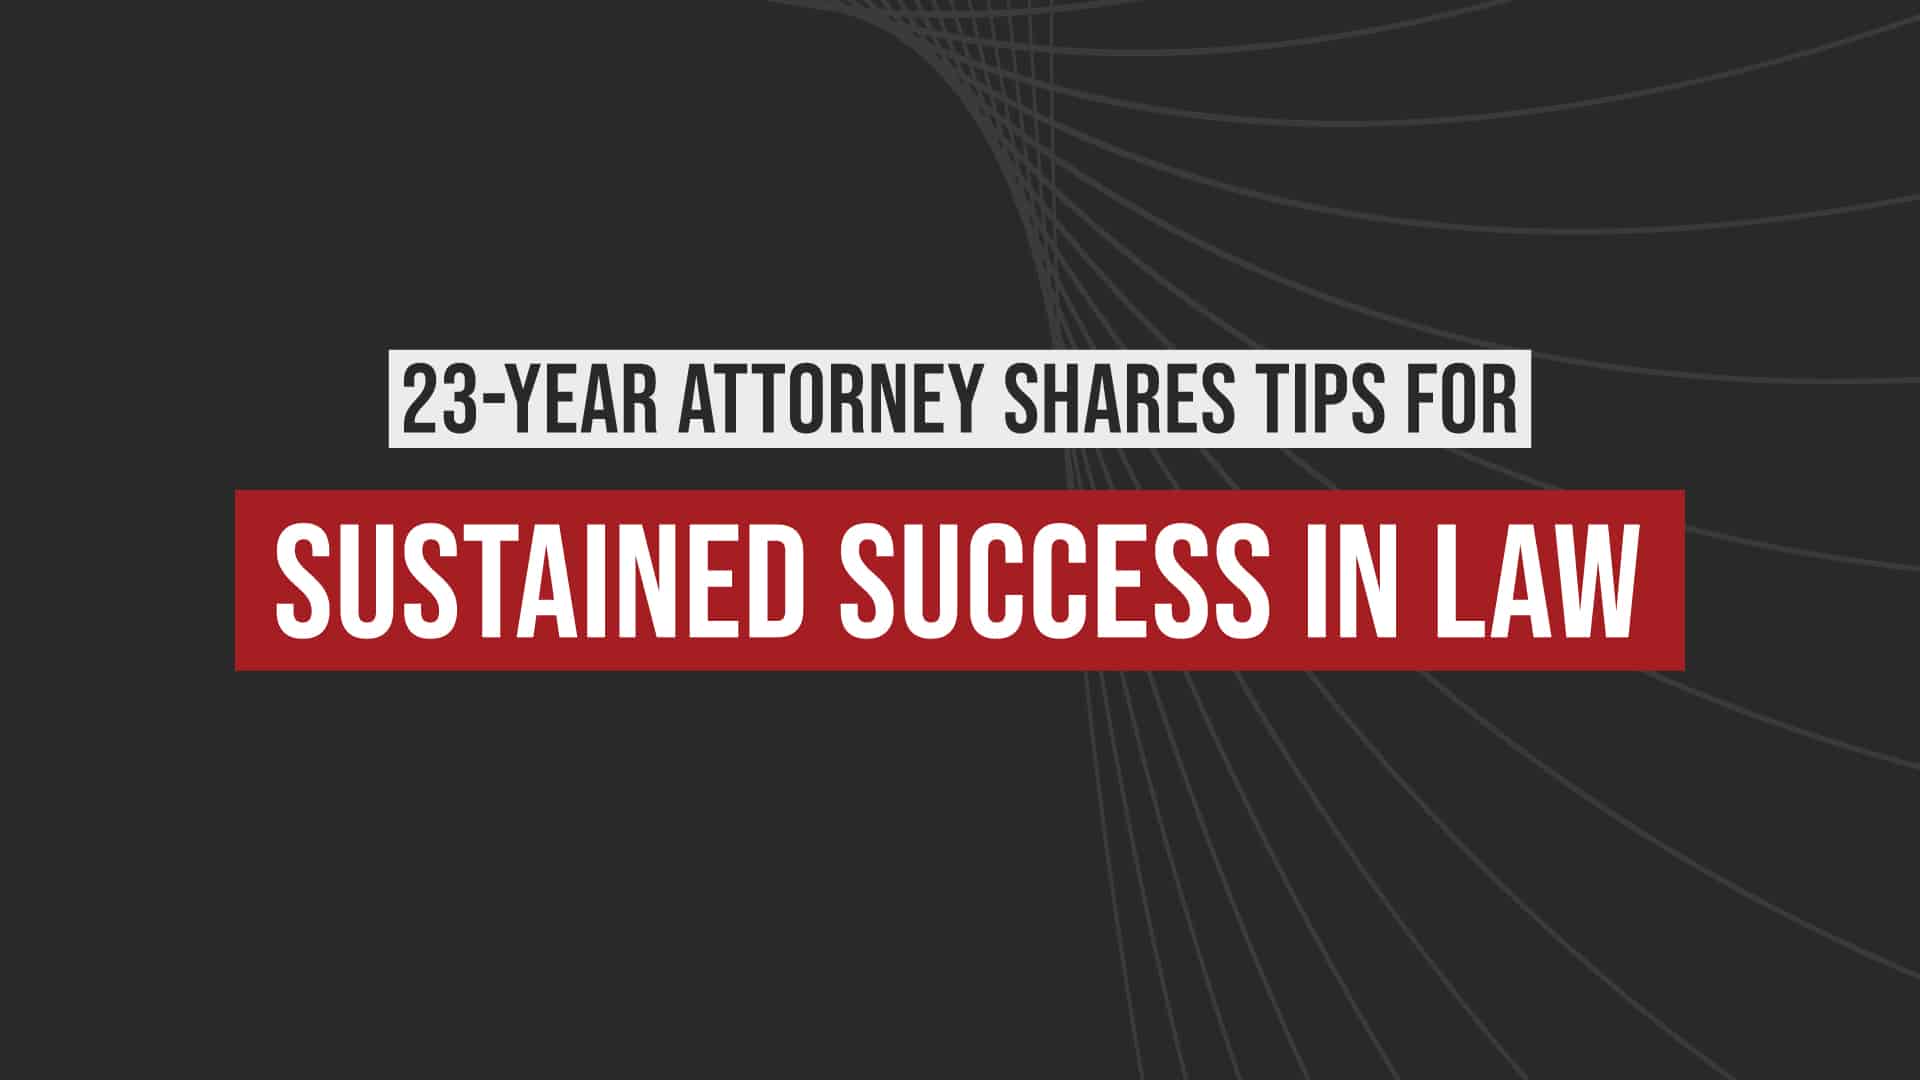 Video cover image graphic, dark background with textured overlay. Video title in white text, "23-Year attorney shares tips for sustained success in law"